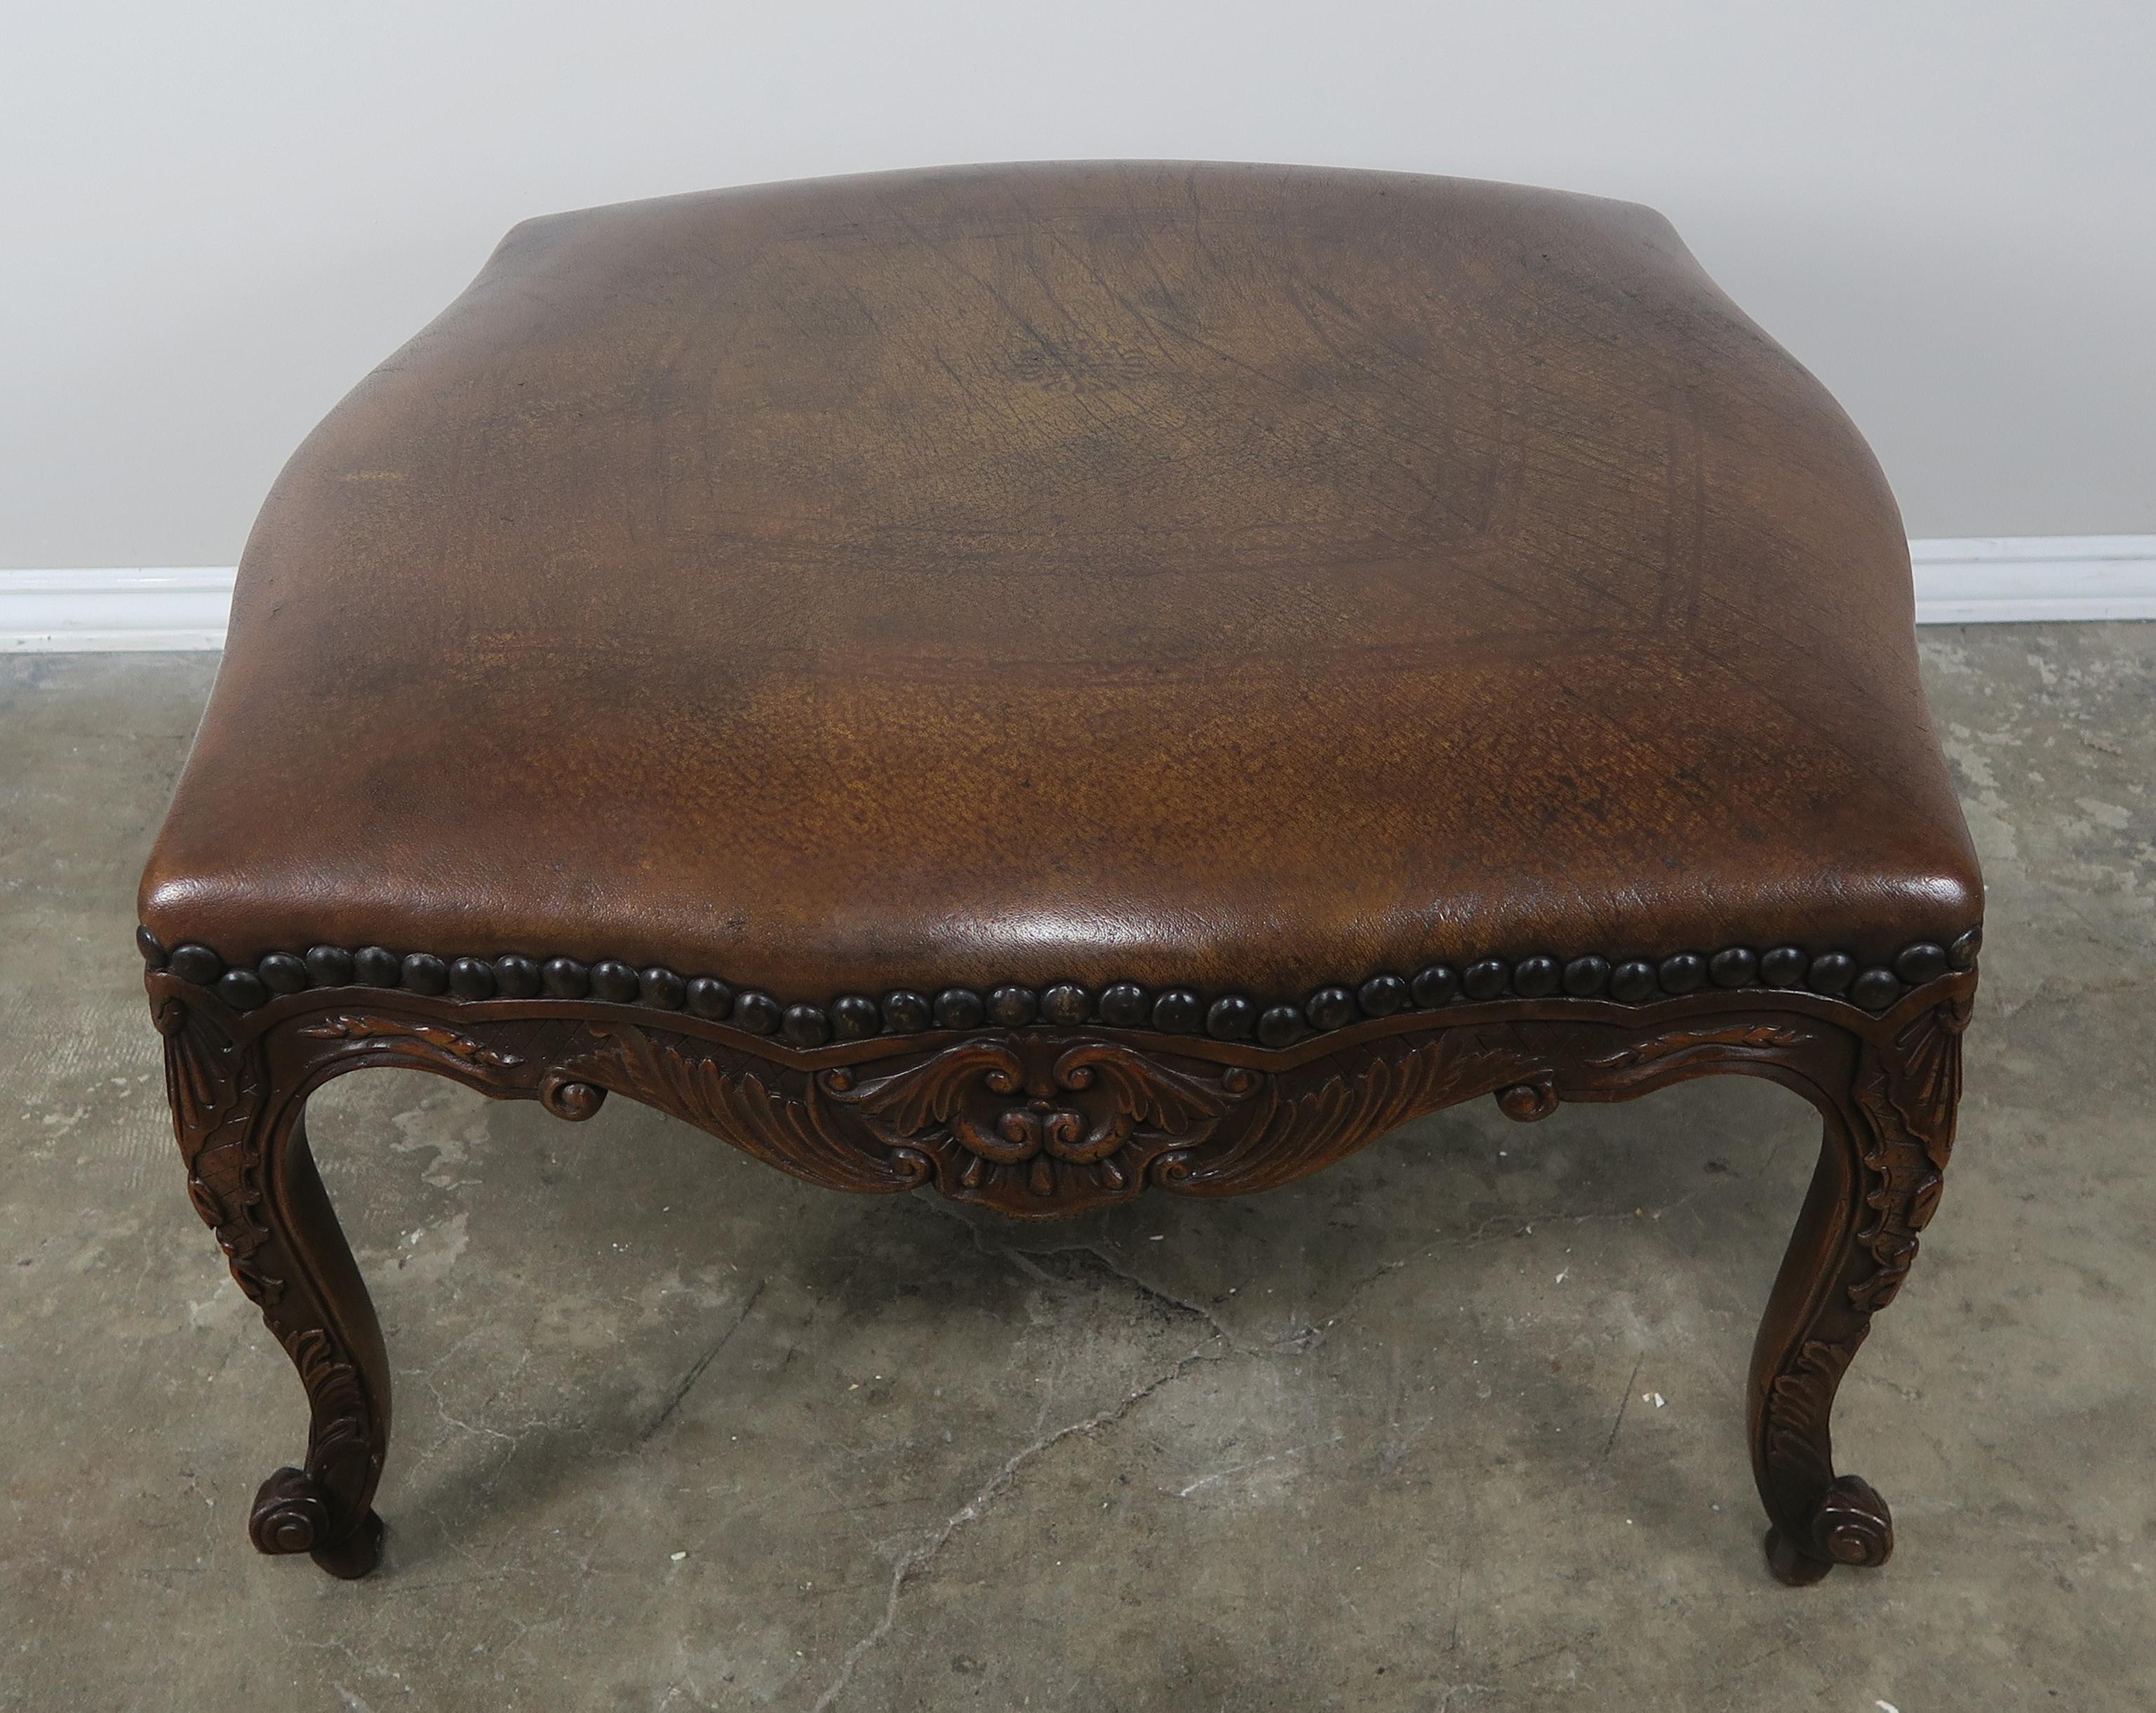 French walnut Louis XV style leather embossed ottoman standing on four cabriole legs that end in ram's head feet. Nailhead trim detail.